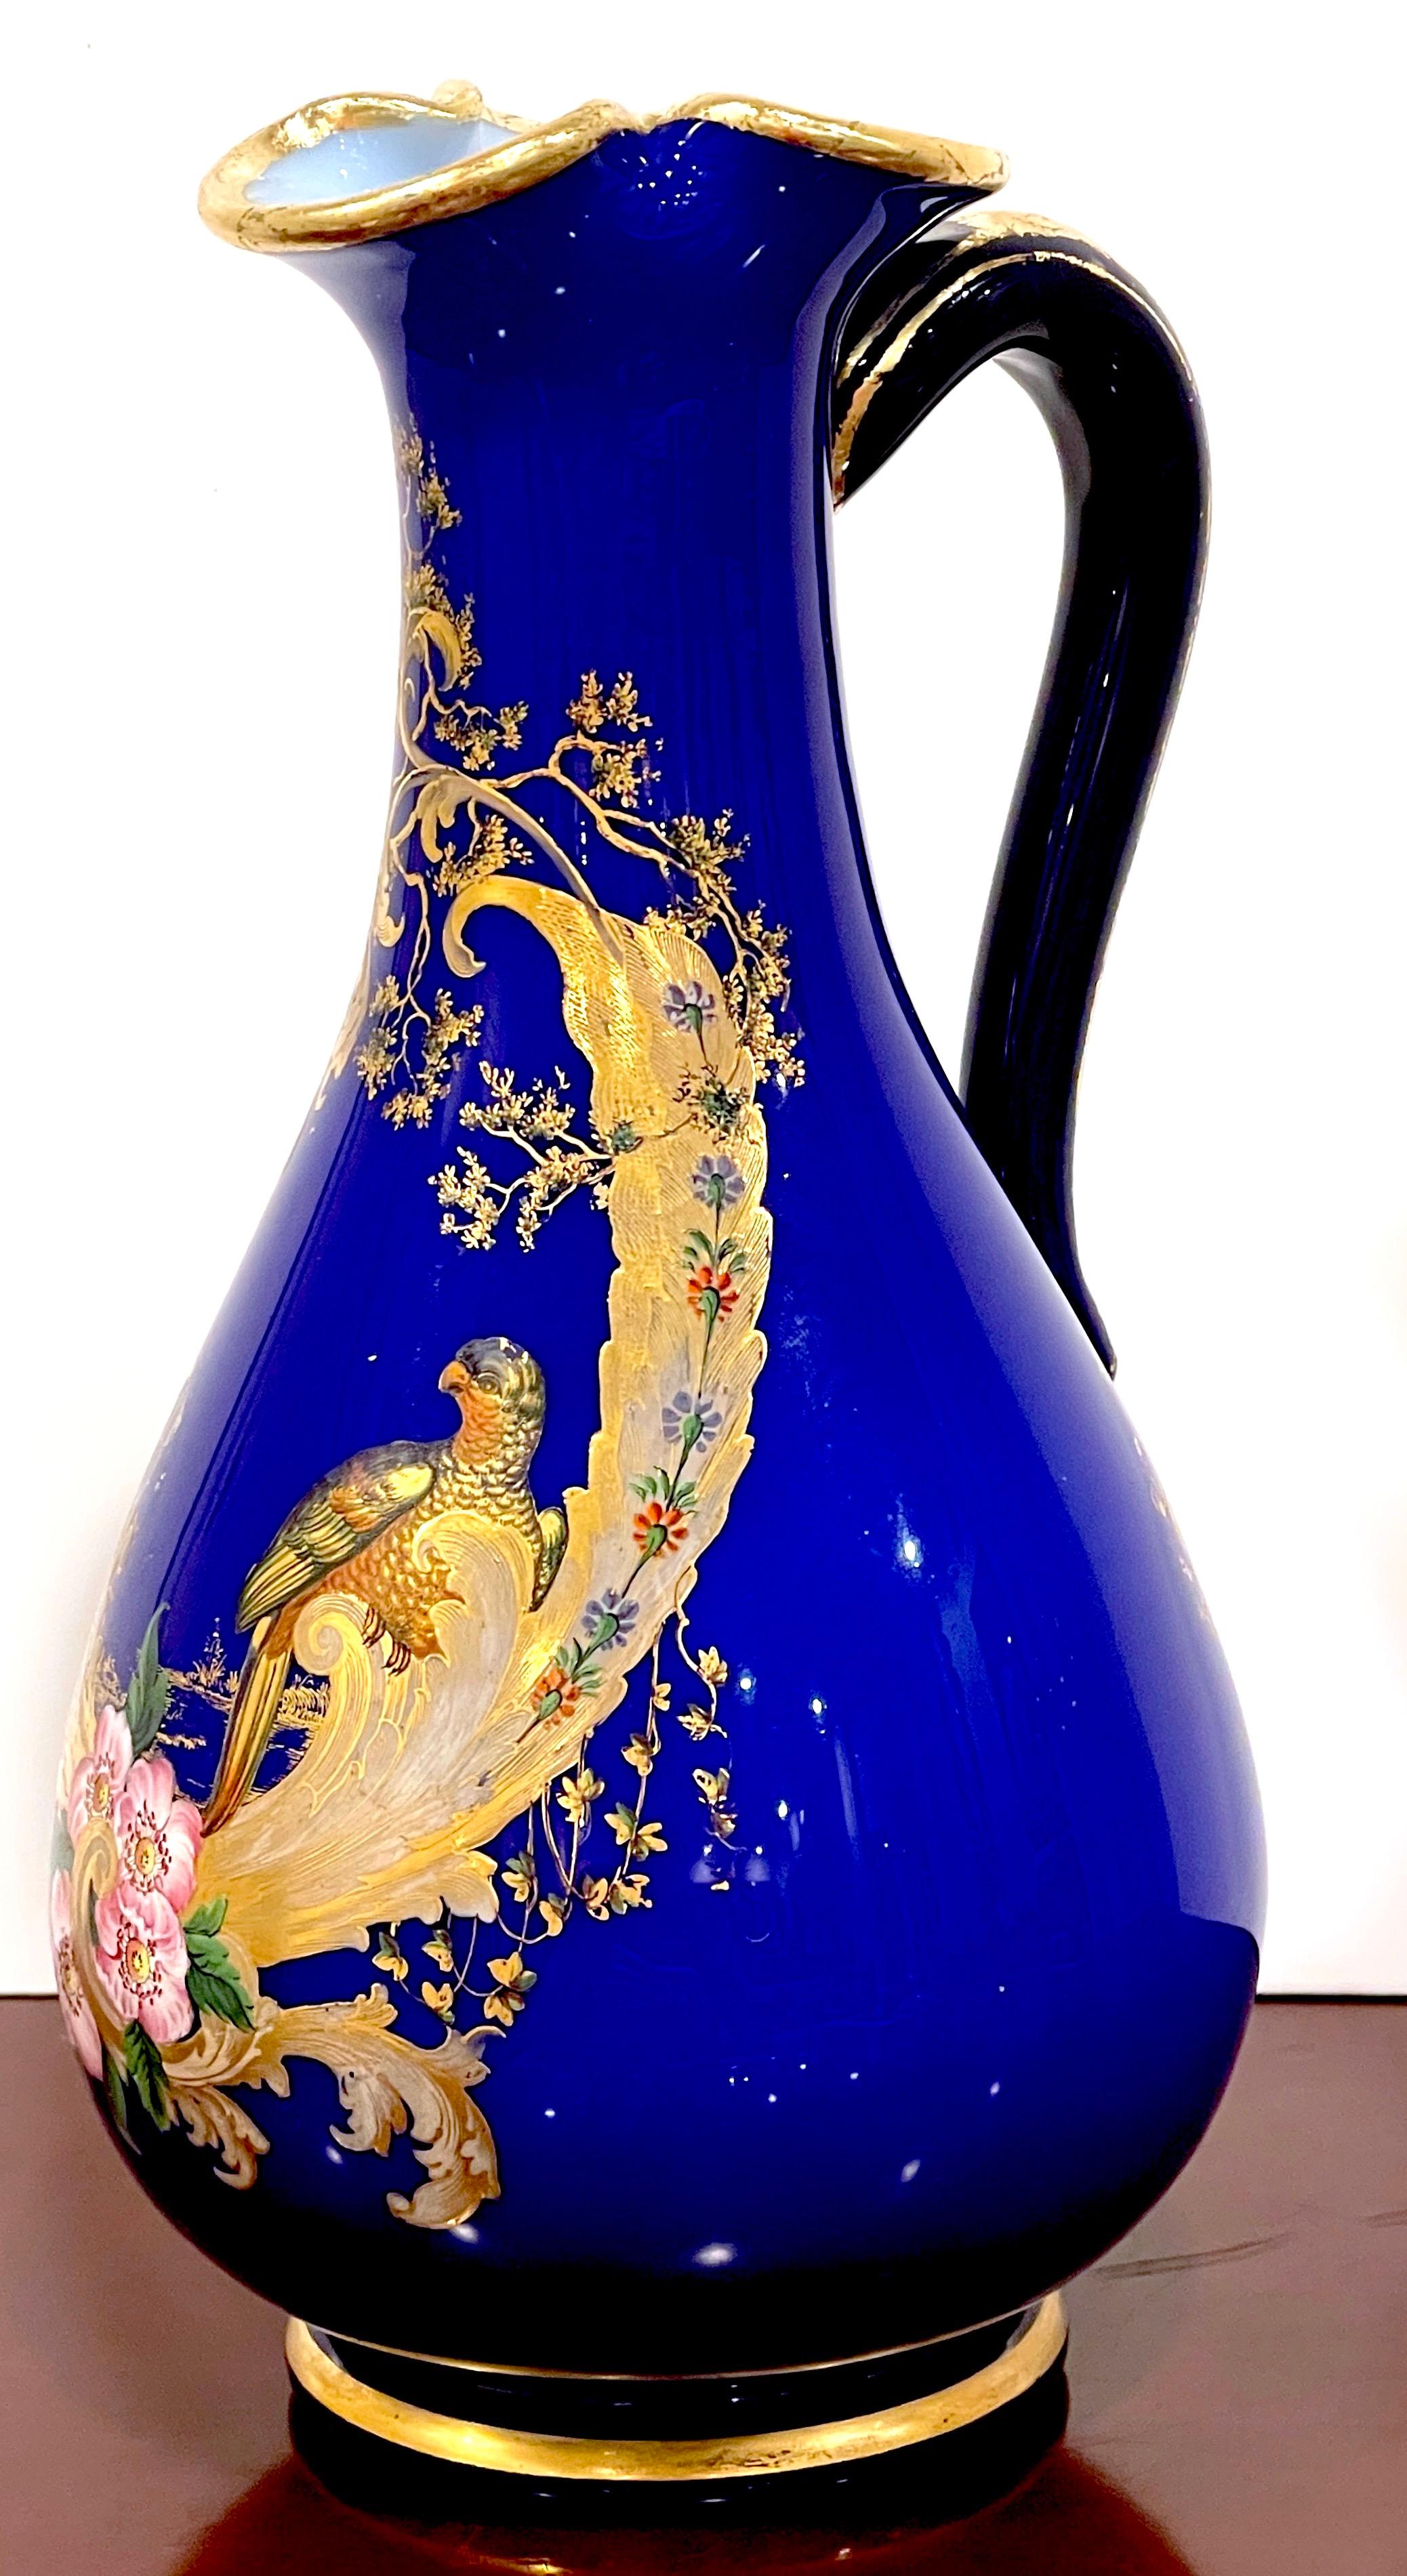 Magnificent French Cobalt Gilt Enameled Ewer, Bird of Paradise in Landscape 
Paris, France, 1870s

This French cobalt gilt enameled ewer from the 1870s is truly magnificent in its design and craftsmanship. Standing at a height of 10 inches, it